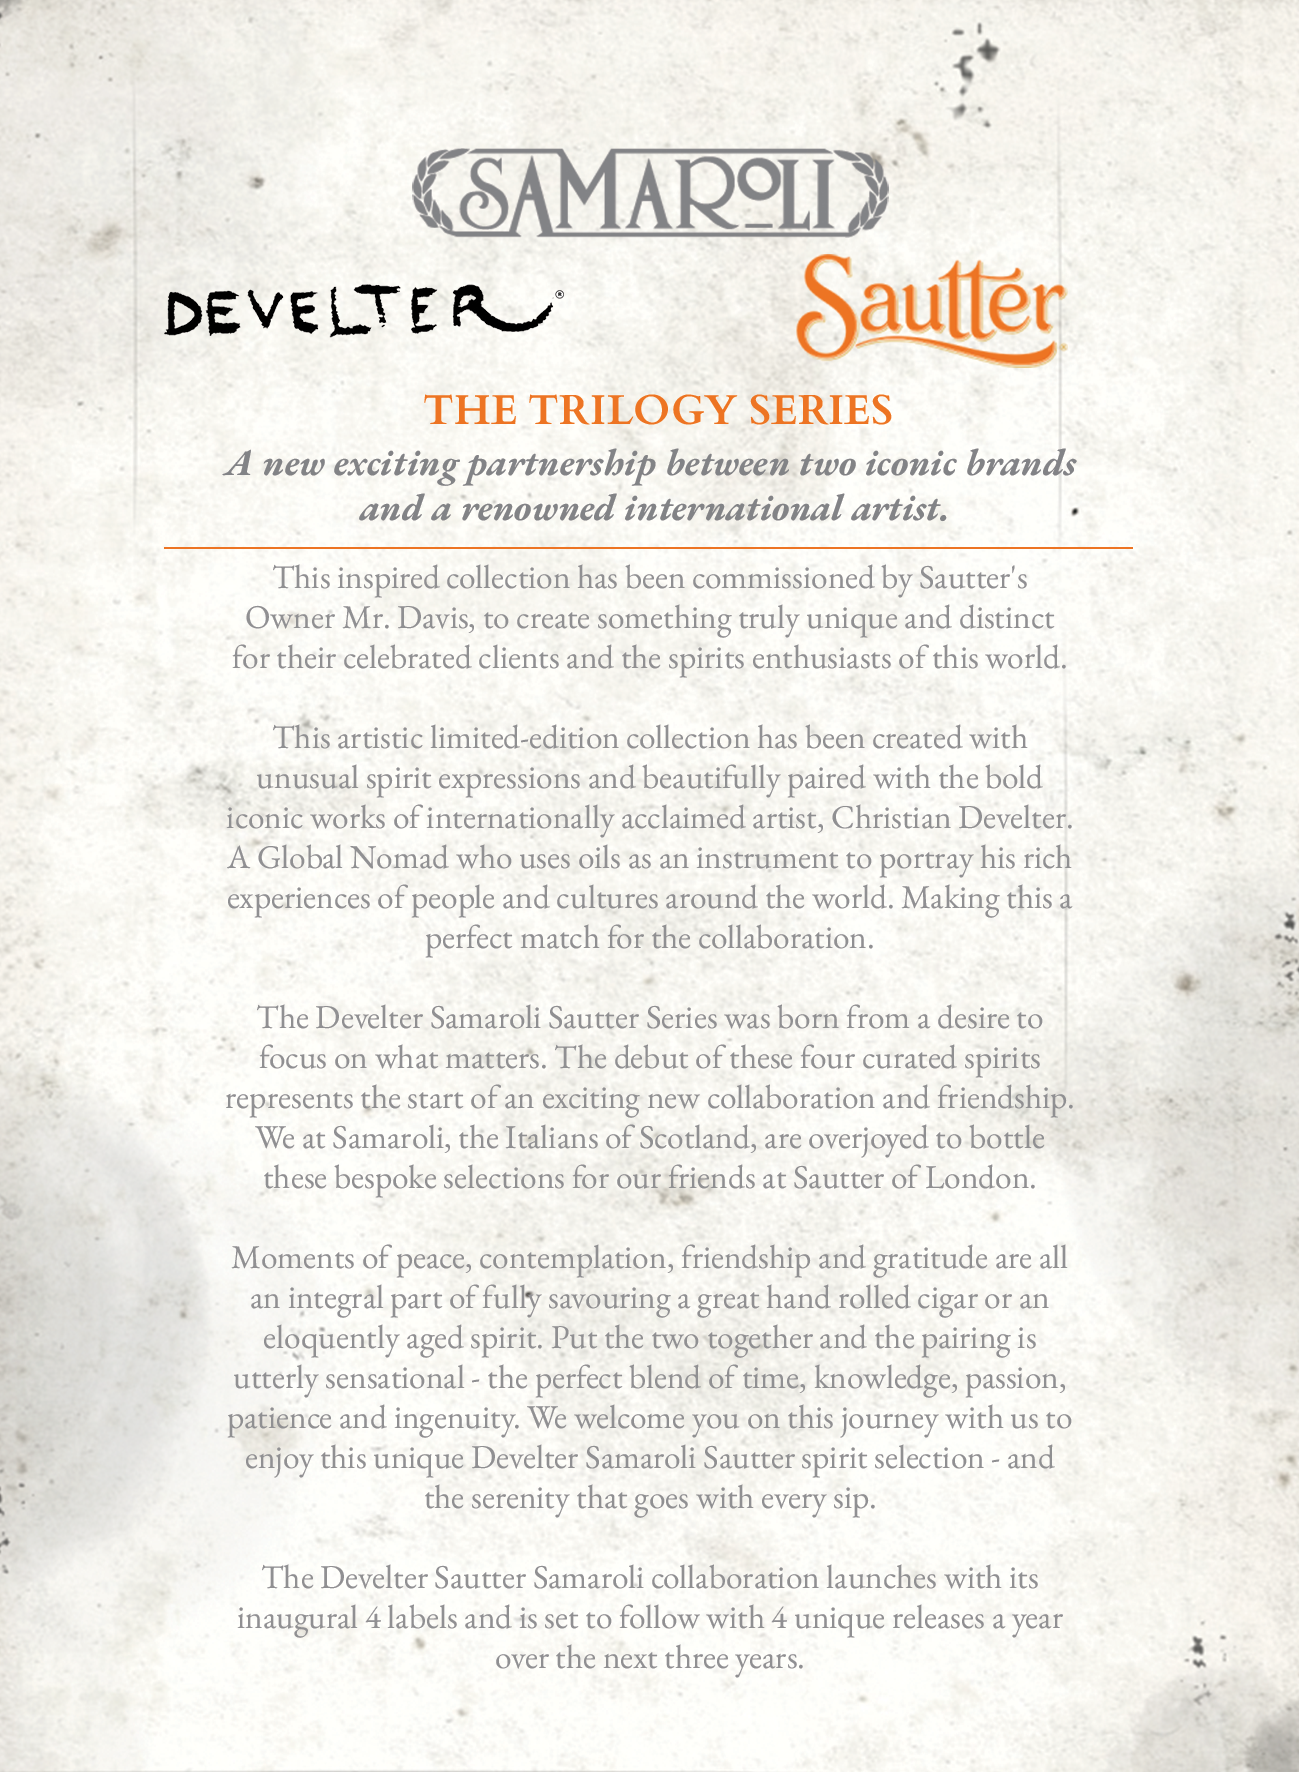 The Develter Trilogy Series - Introduction.png